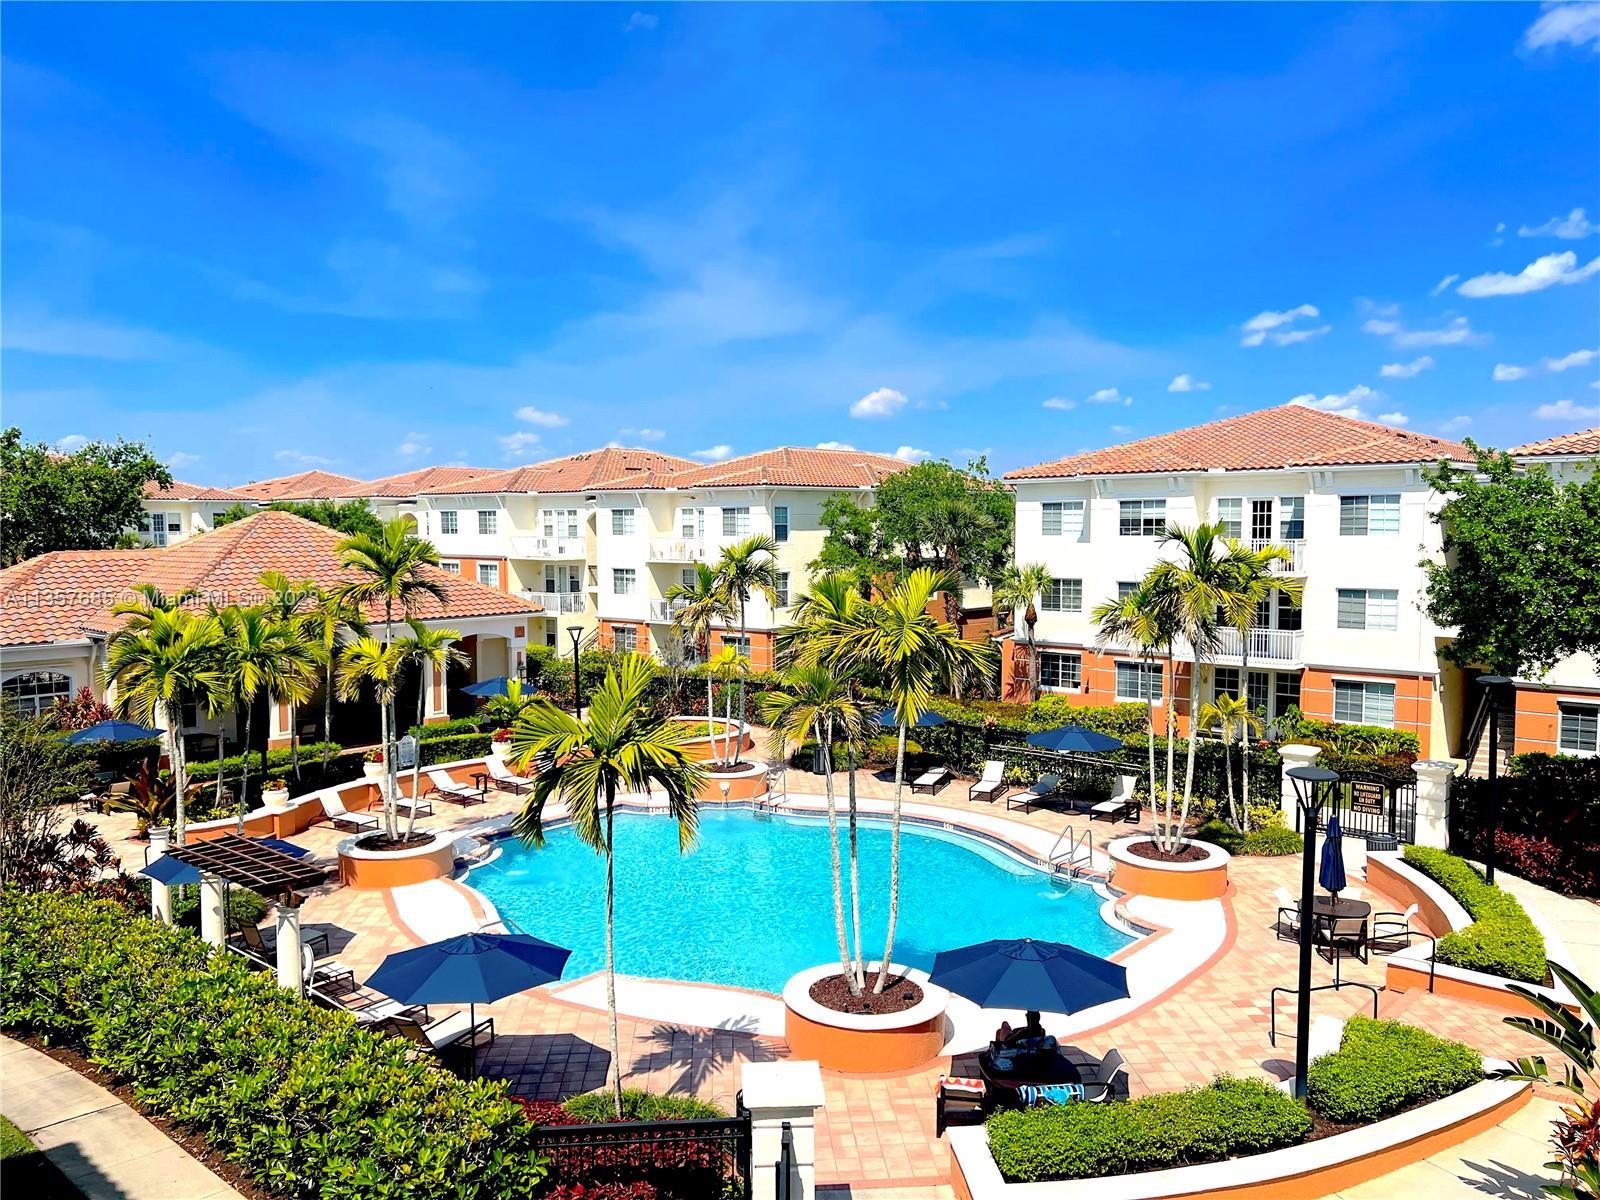 Located in the city of West Palm Beach, only minutes away from Clematis Street, The Kravitz Center, 